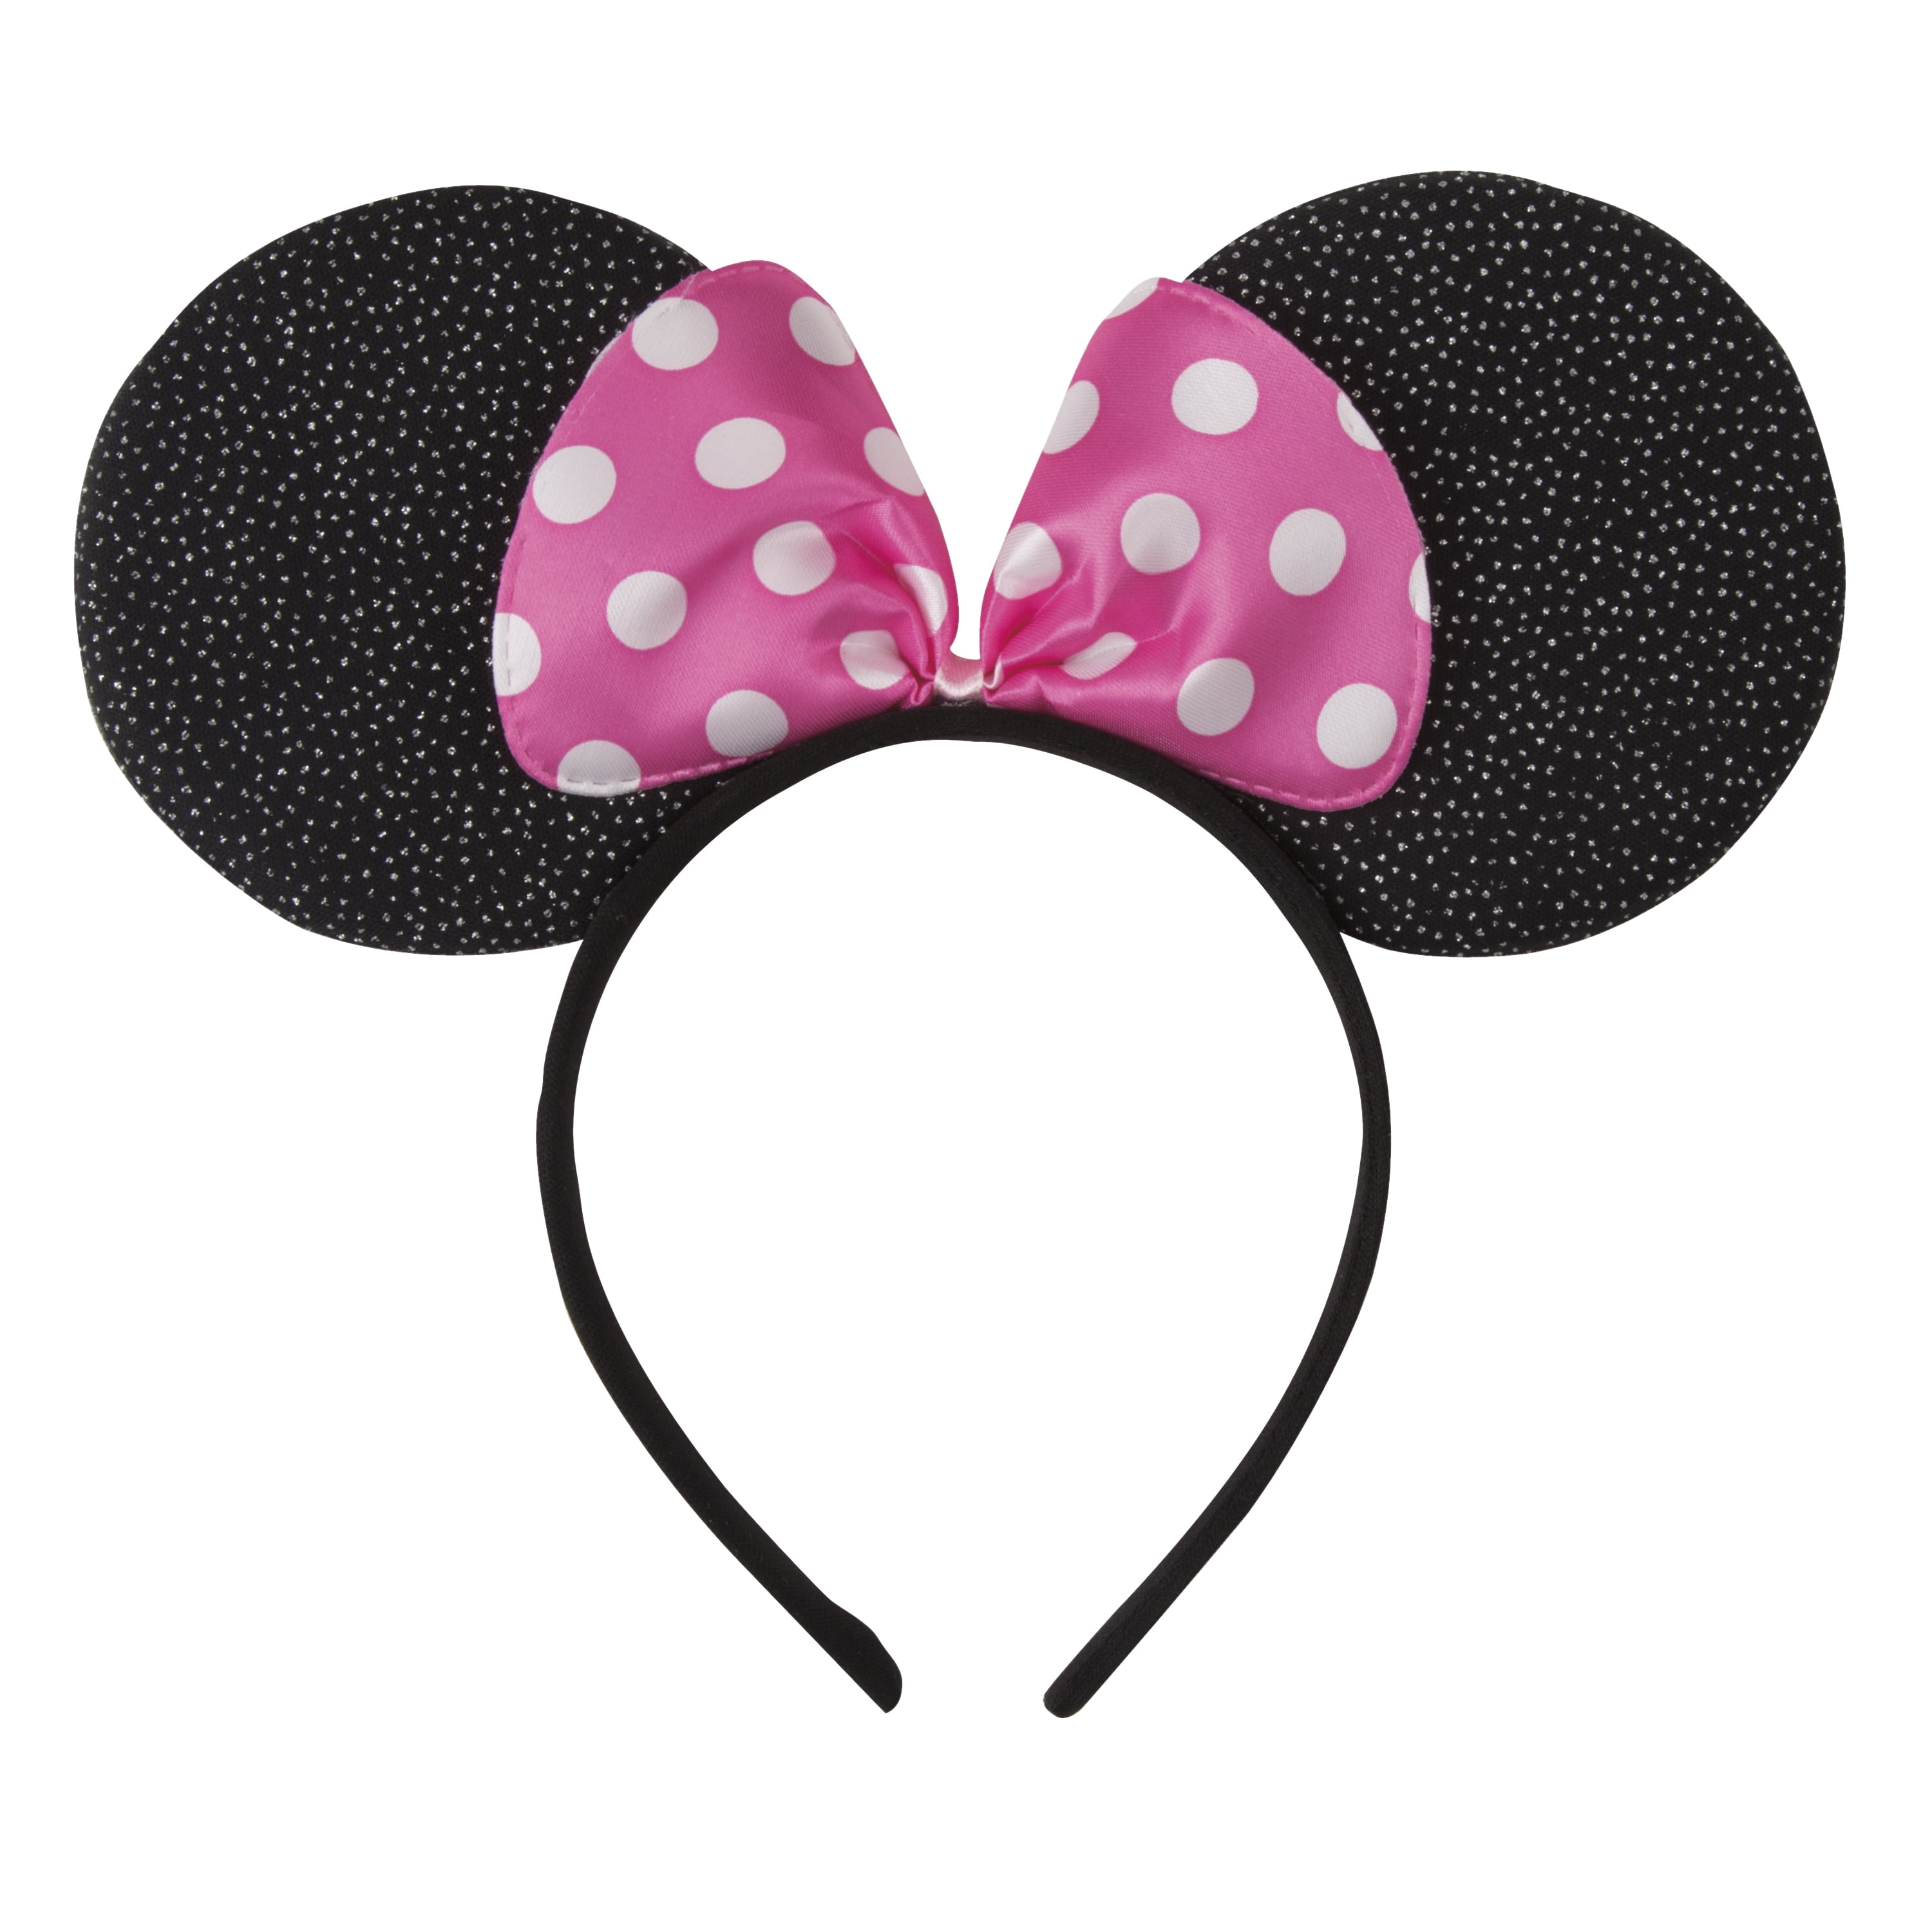 UK Minnie Mouse Ears Headband Costume Mickey Mouse Fancy Dress Party Spotted Bow 